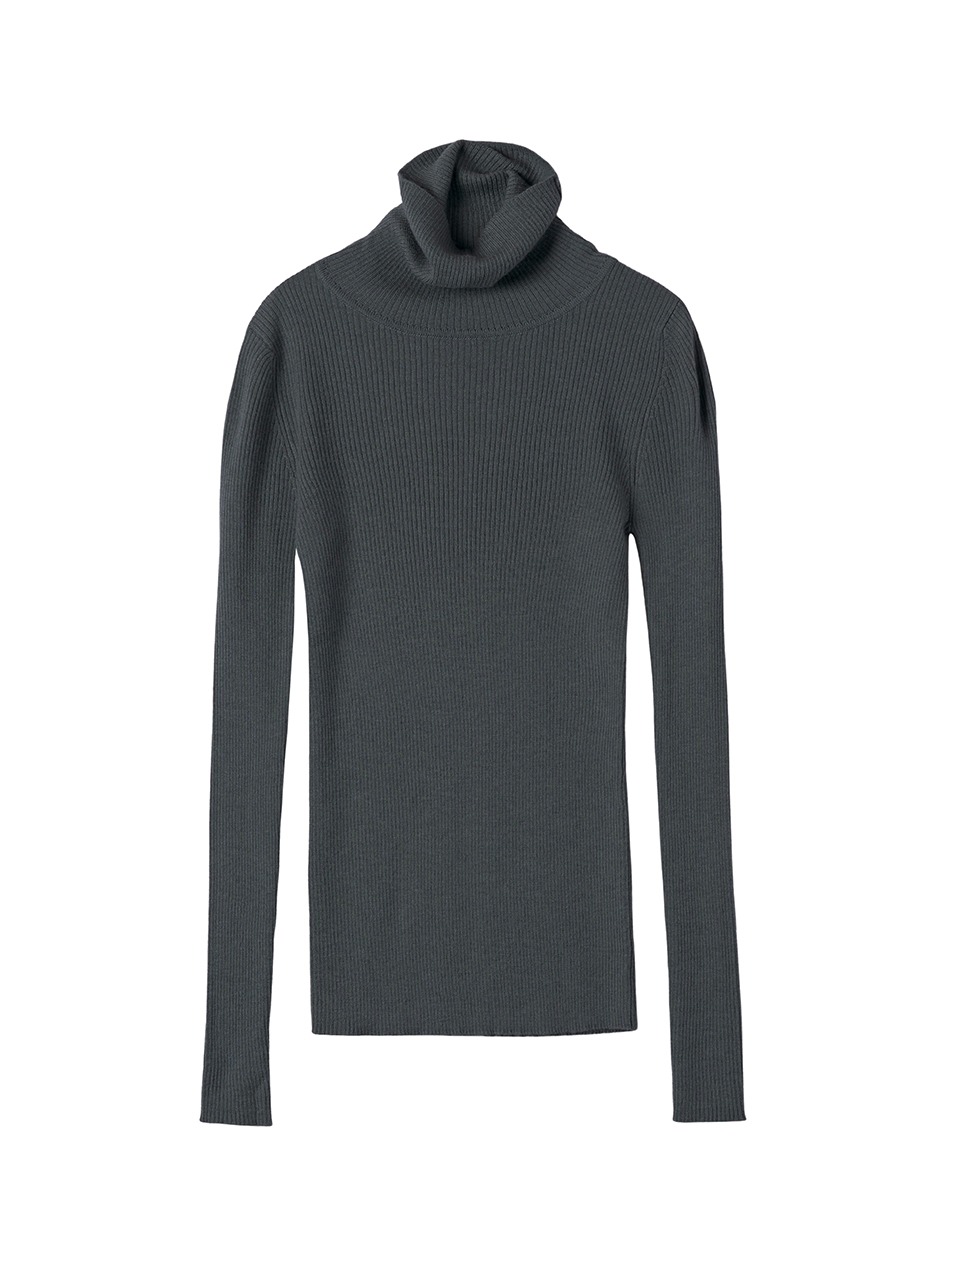 Mabel Turtle Neck Layered Knit Charcoal